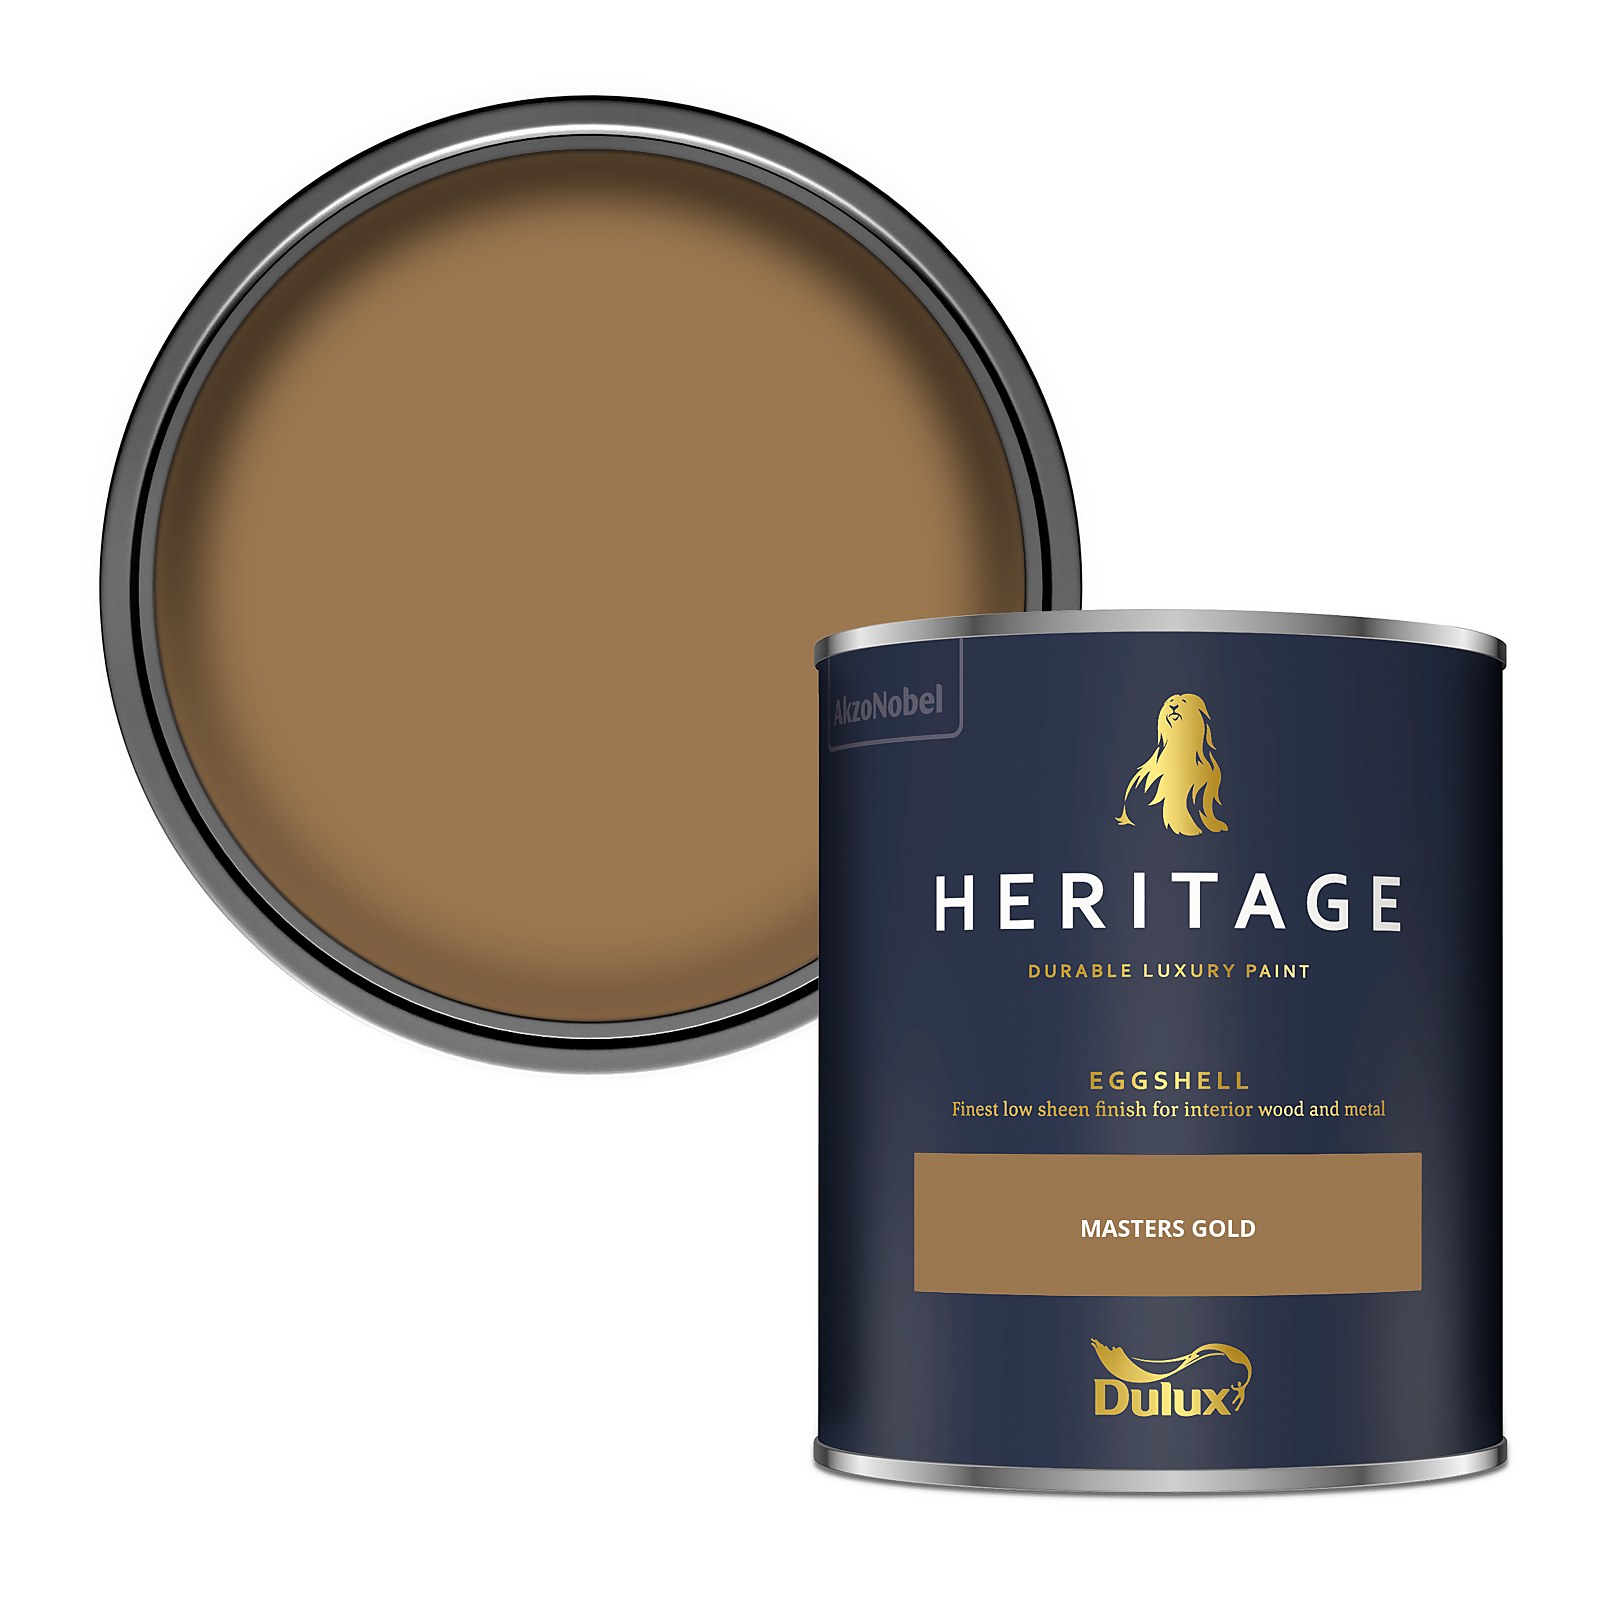 Photo of Dulux Heritage Eggshell Paint - Masters Gold - 750ml